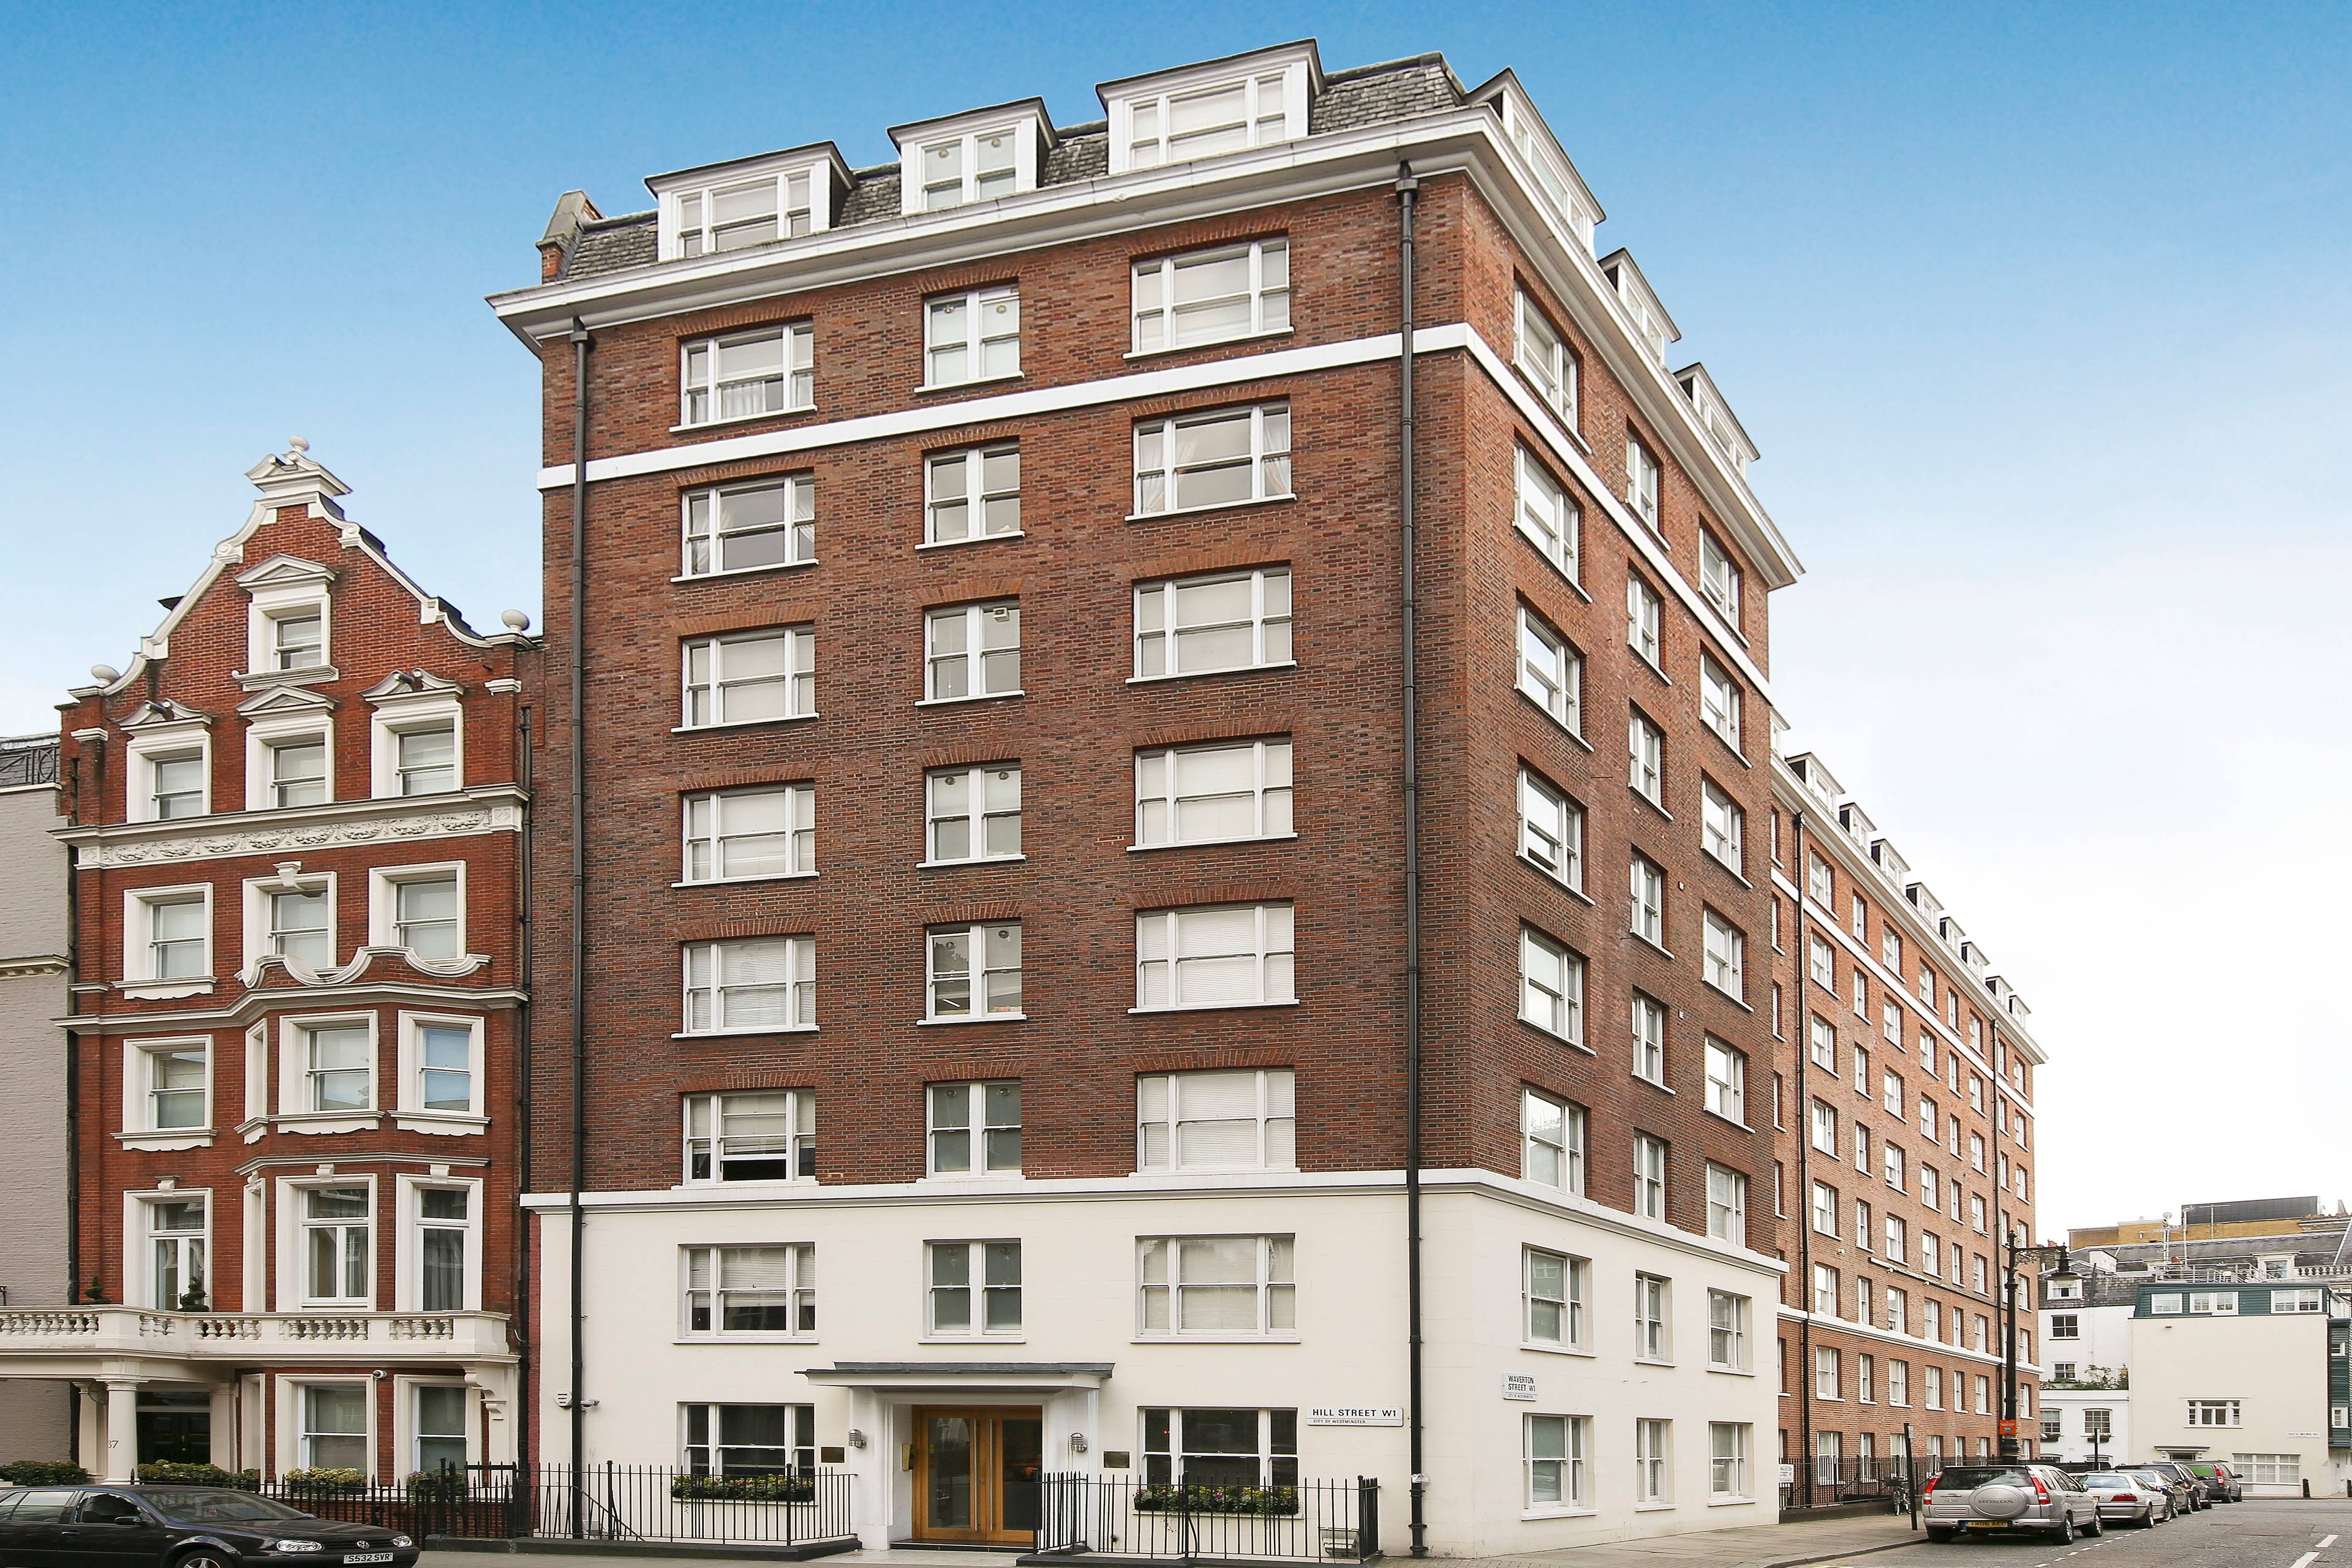 Two spacious double bedroom apartment Mayfair